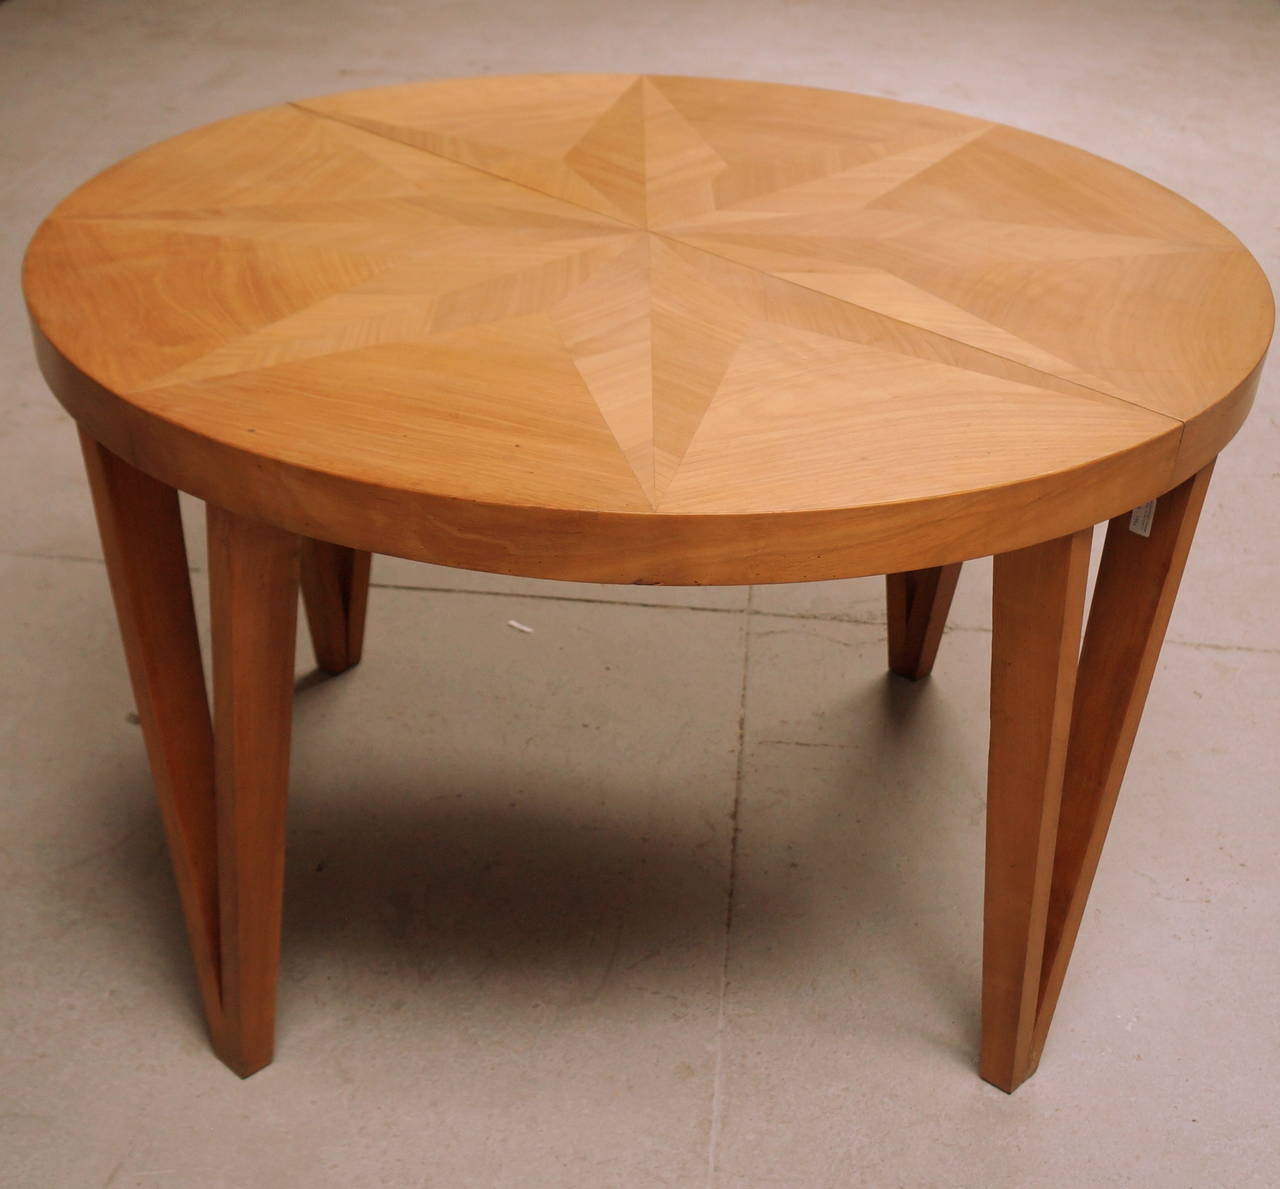 Sycamore Round Dining Table In Good Condition For Sale In Brooklyn, NY